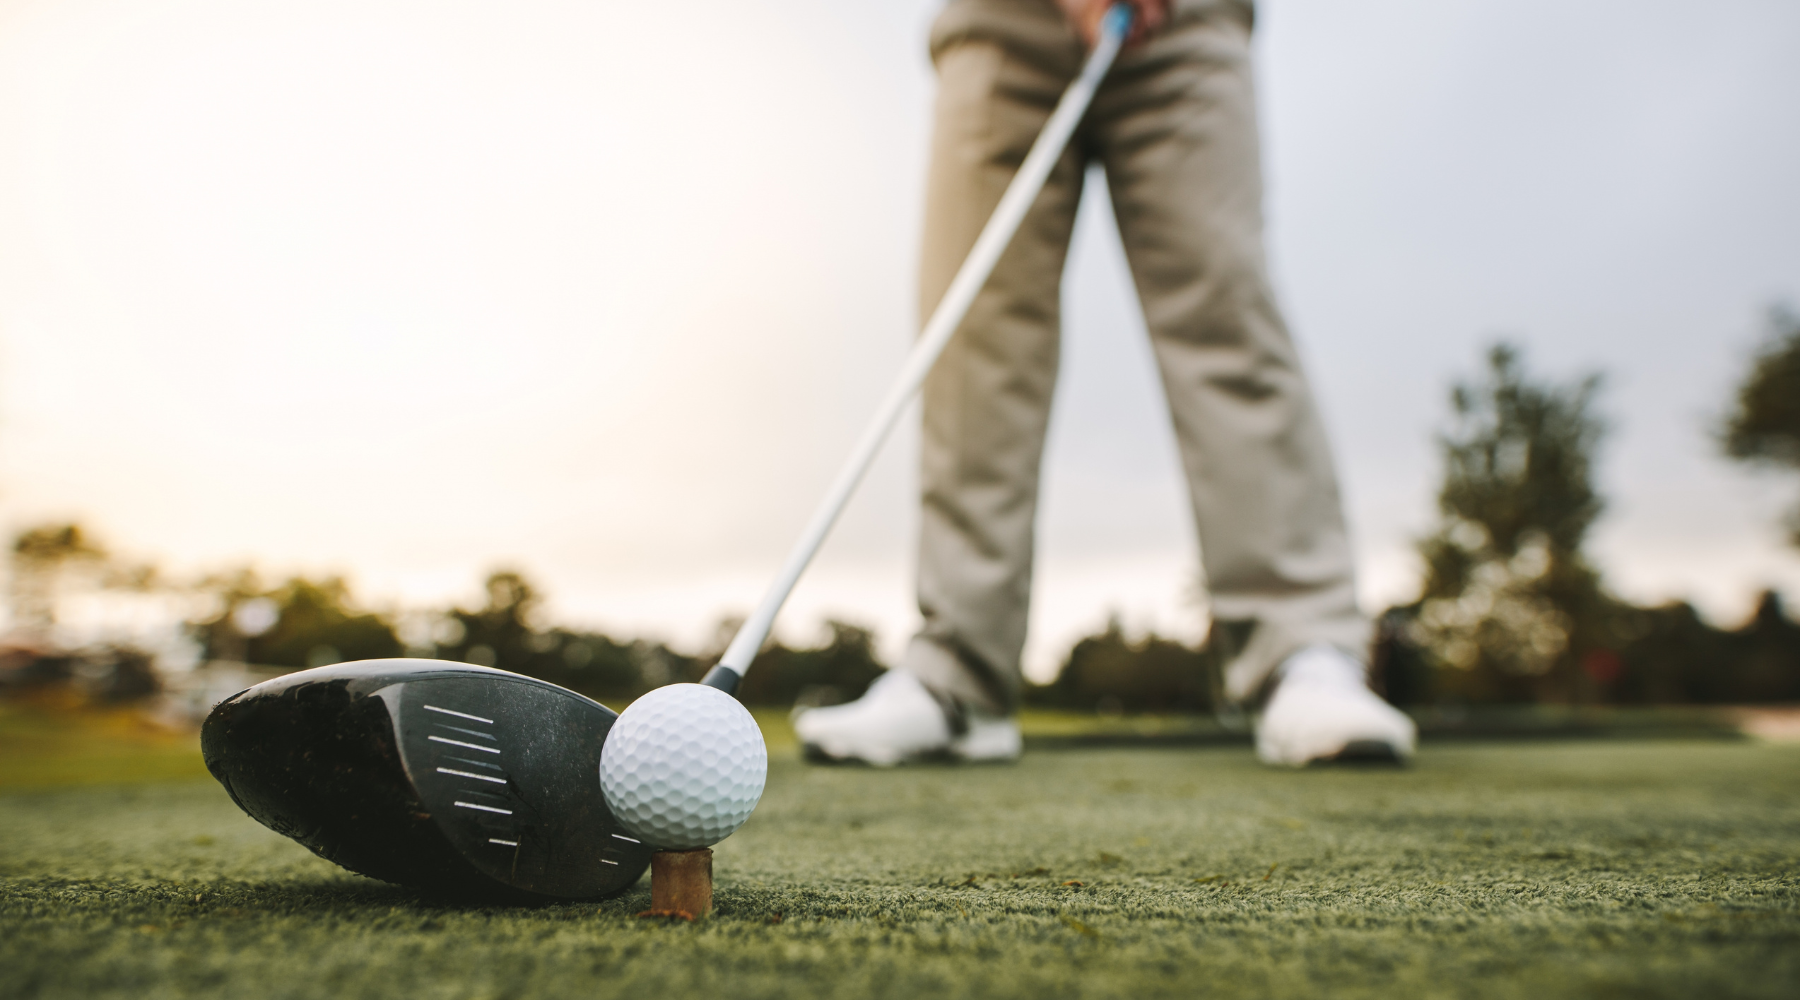 5 EXERCISES TO IMPROVE YOUR GOLF GAME